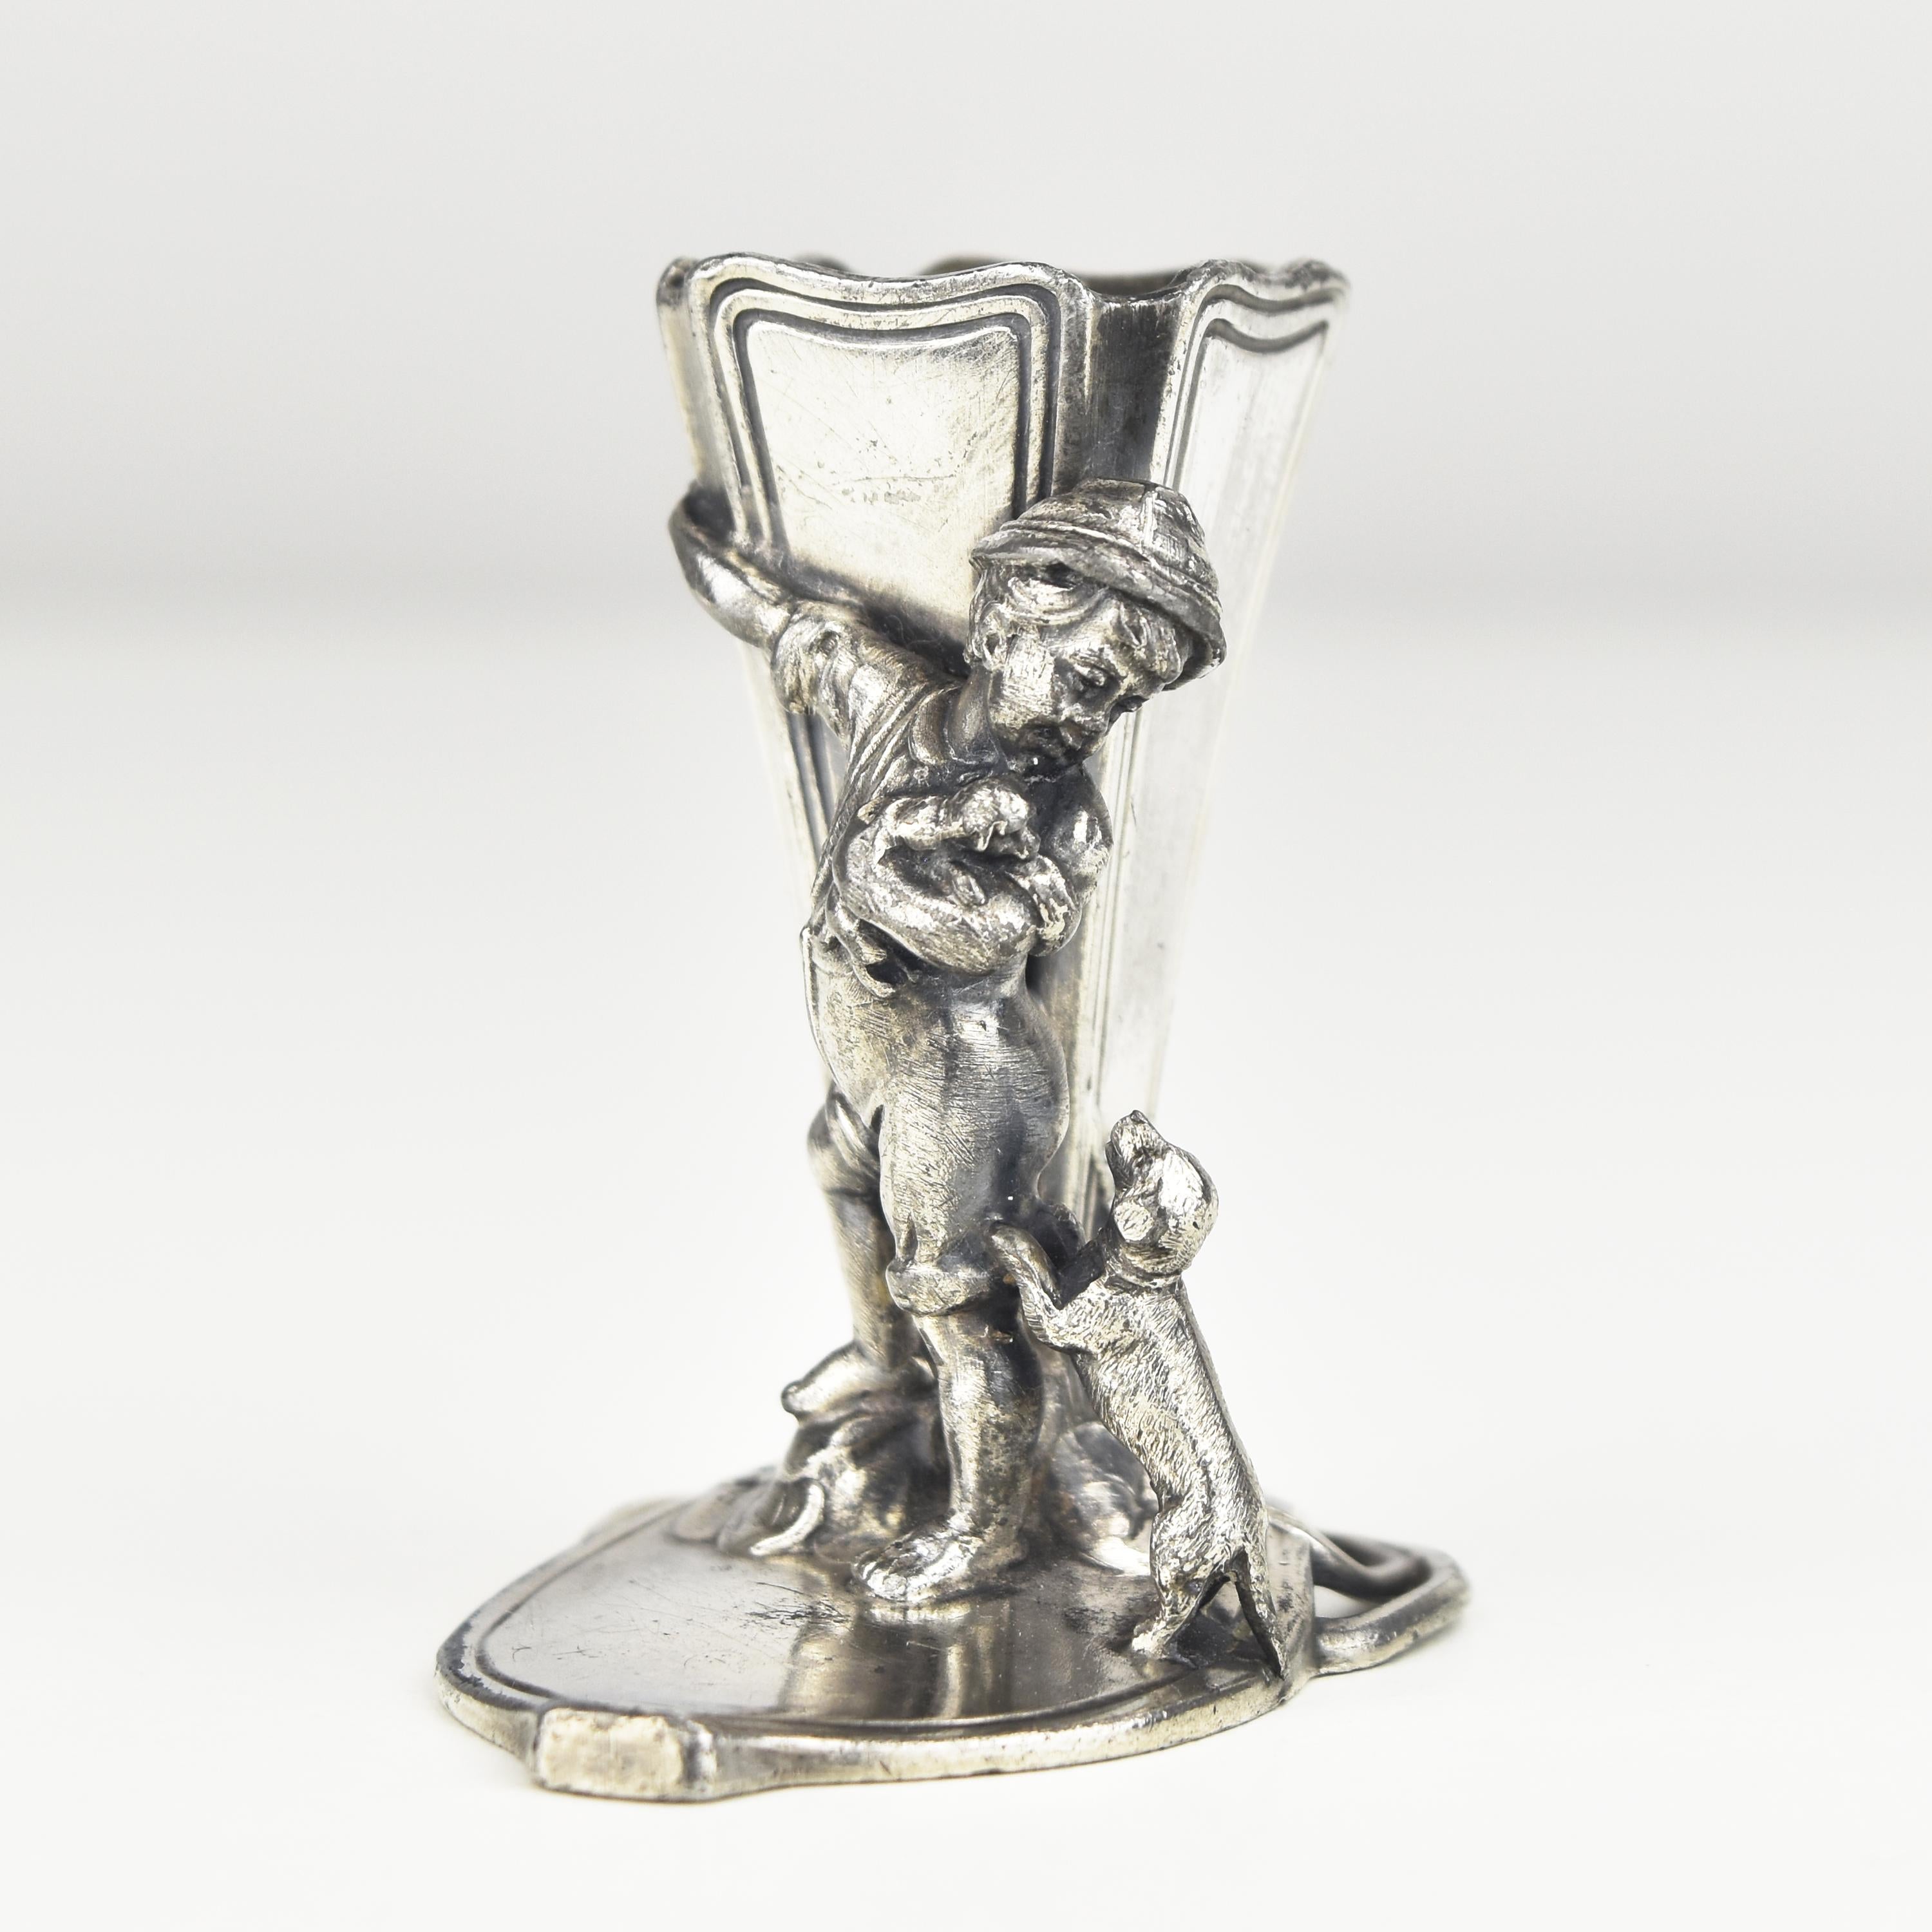 Early 20th Century Figurative Toothpick Holder Stand WMF Art Nouveau Antique Silverplated For Sale